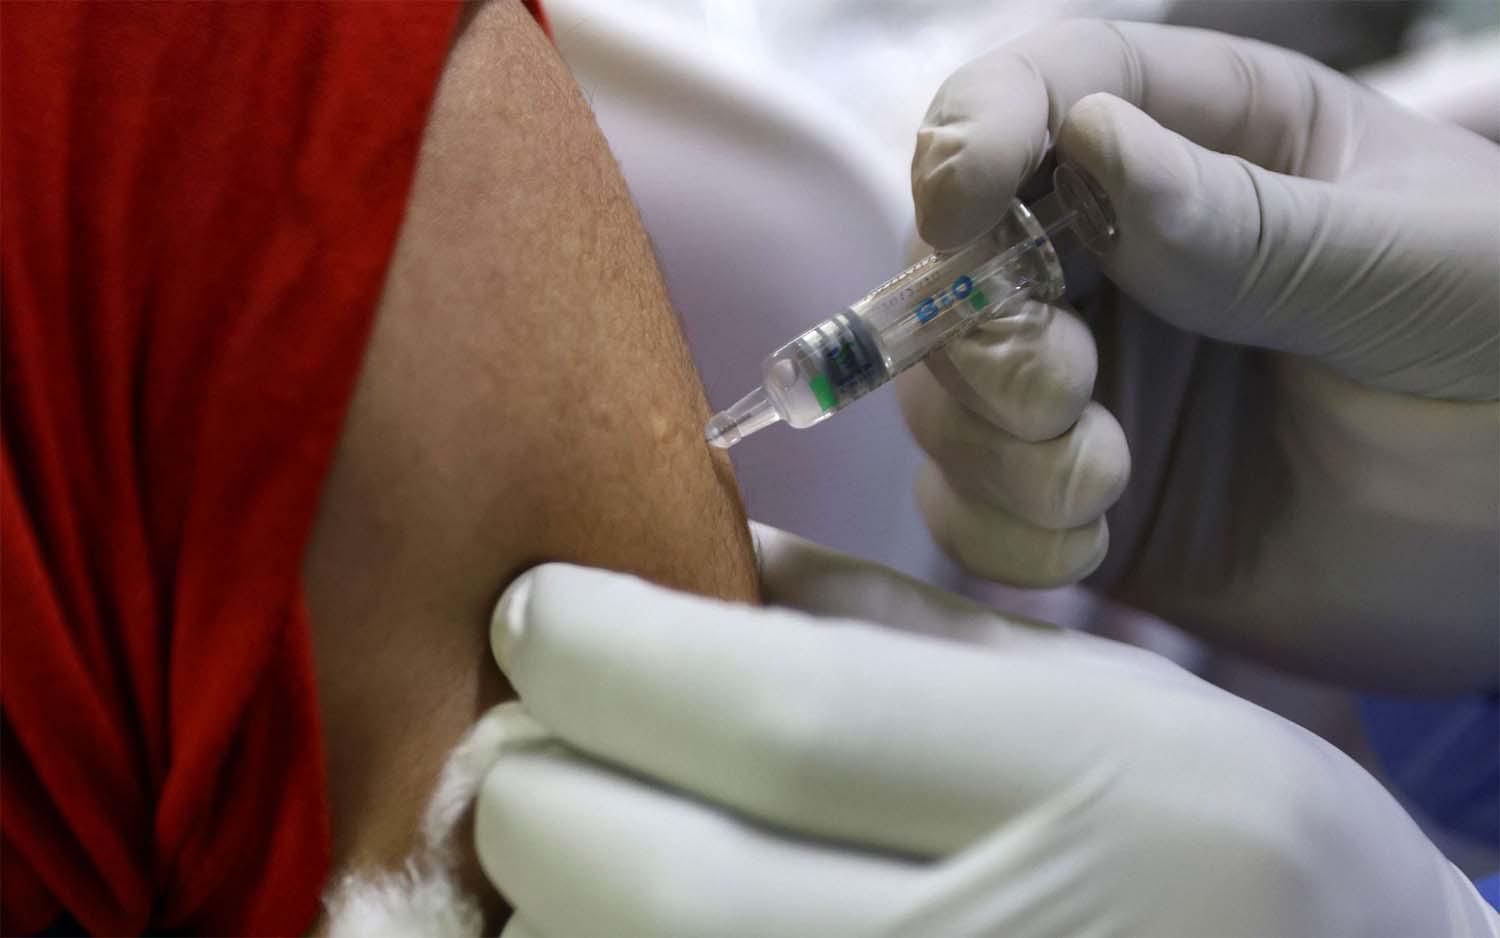 The UAE has vaccinated about 65% of the eligible population